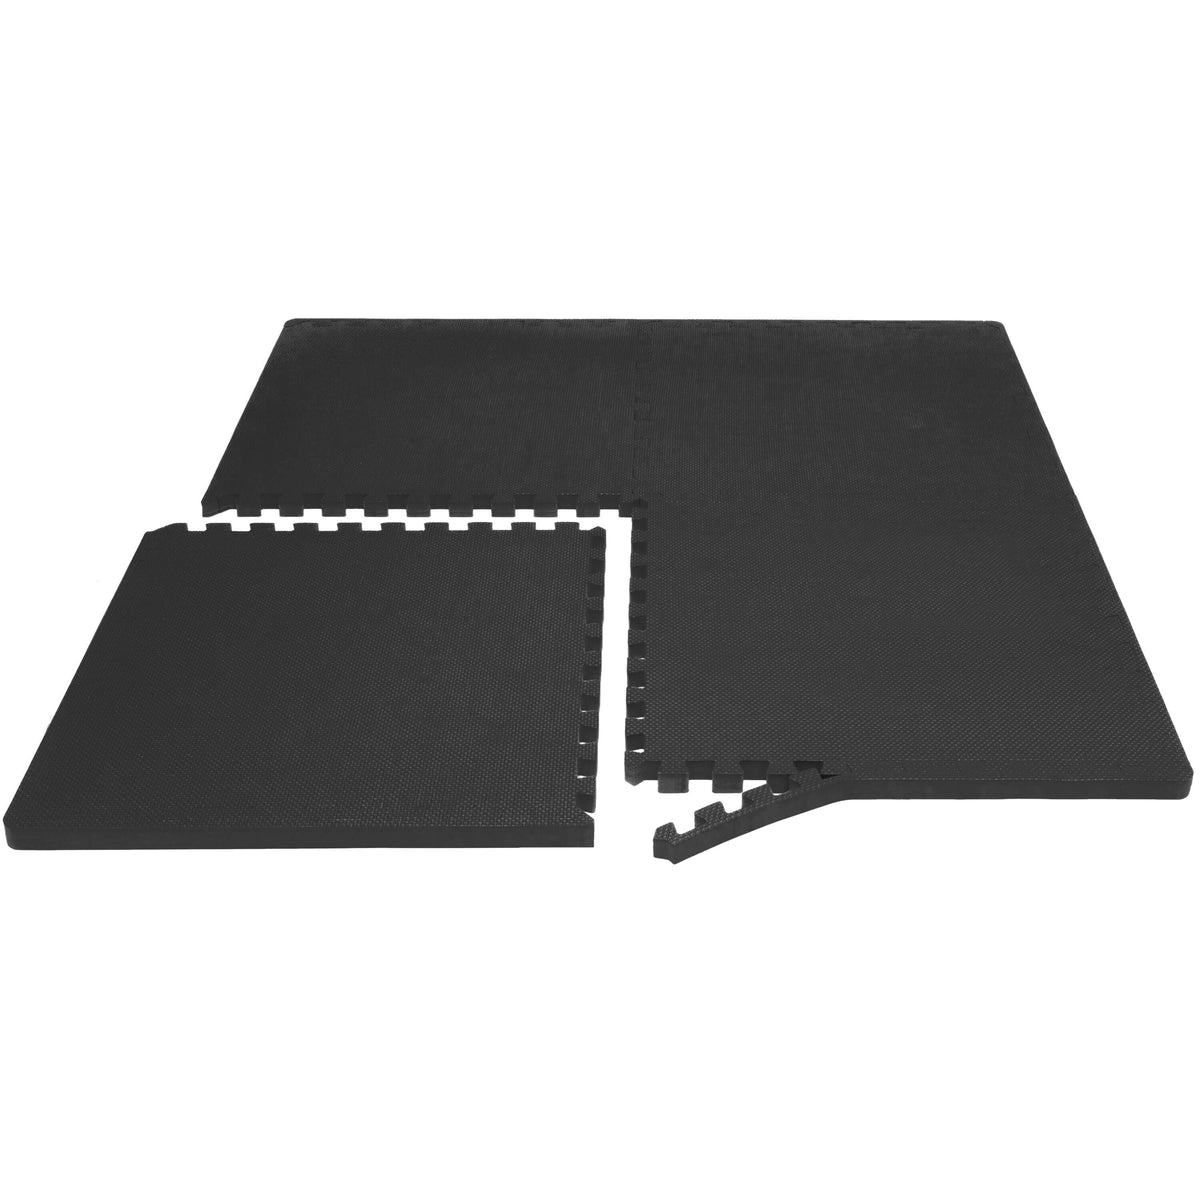 ProsourceFit Exercise Puzzle Mat 1" by Jupiter Gear